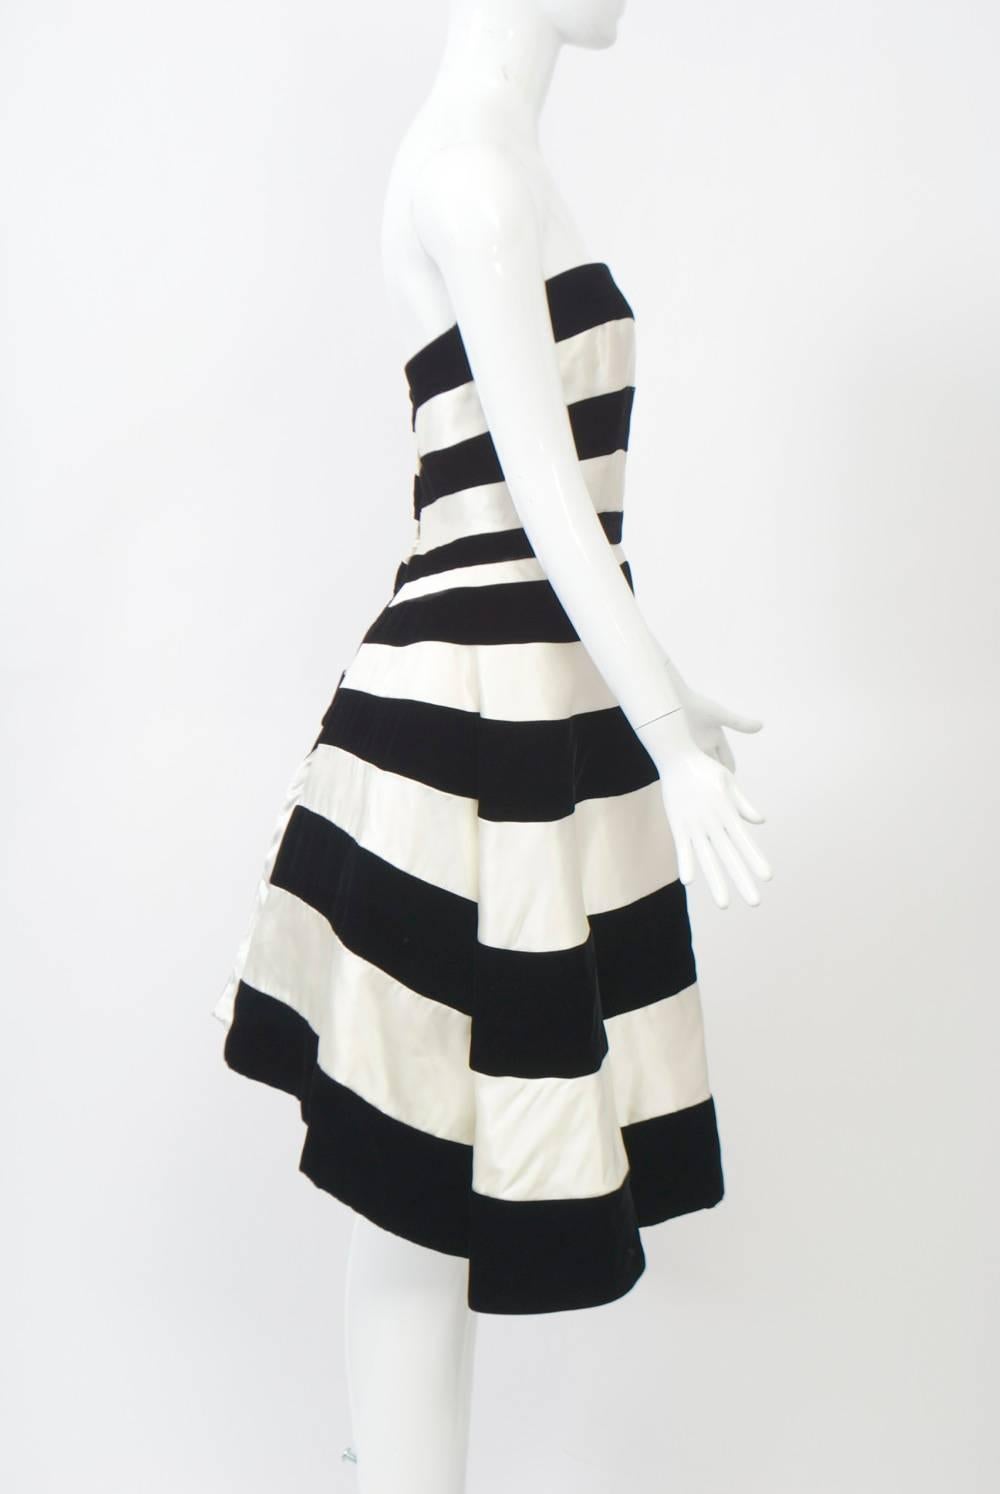 One of Victor Costa's best designs, this strapless cocktail/evening dress is fashioned of white satin and black velvet alternating horizontal stripes with fitted bodice leading to an A-line below-knee skirt. The most interesting feature of the dress